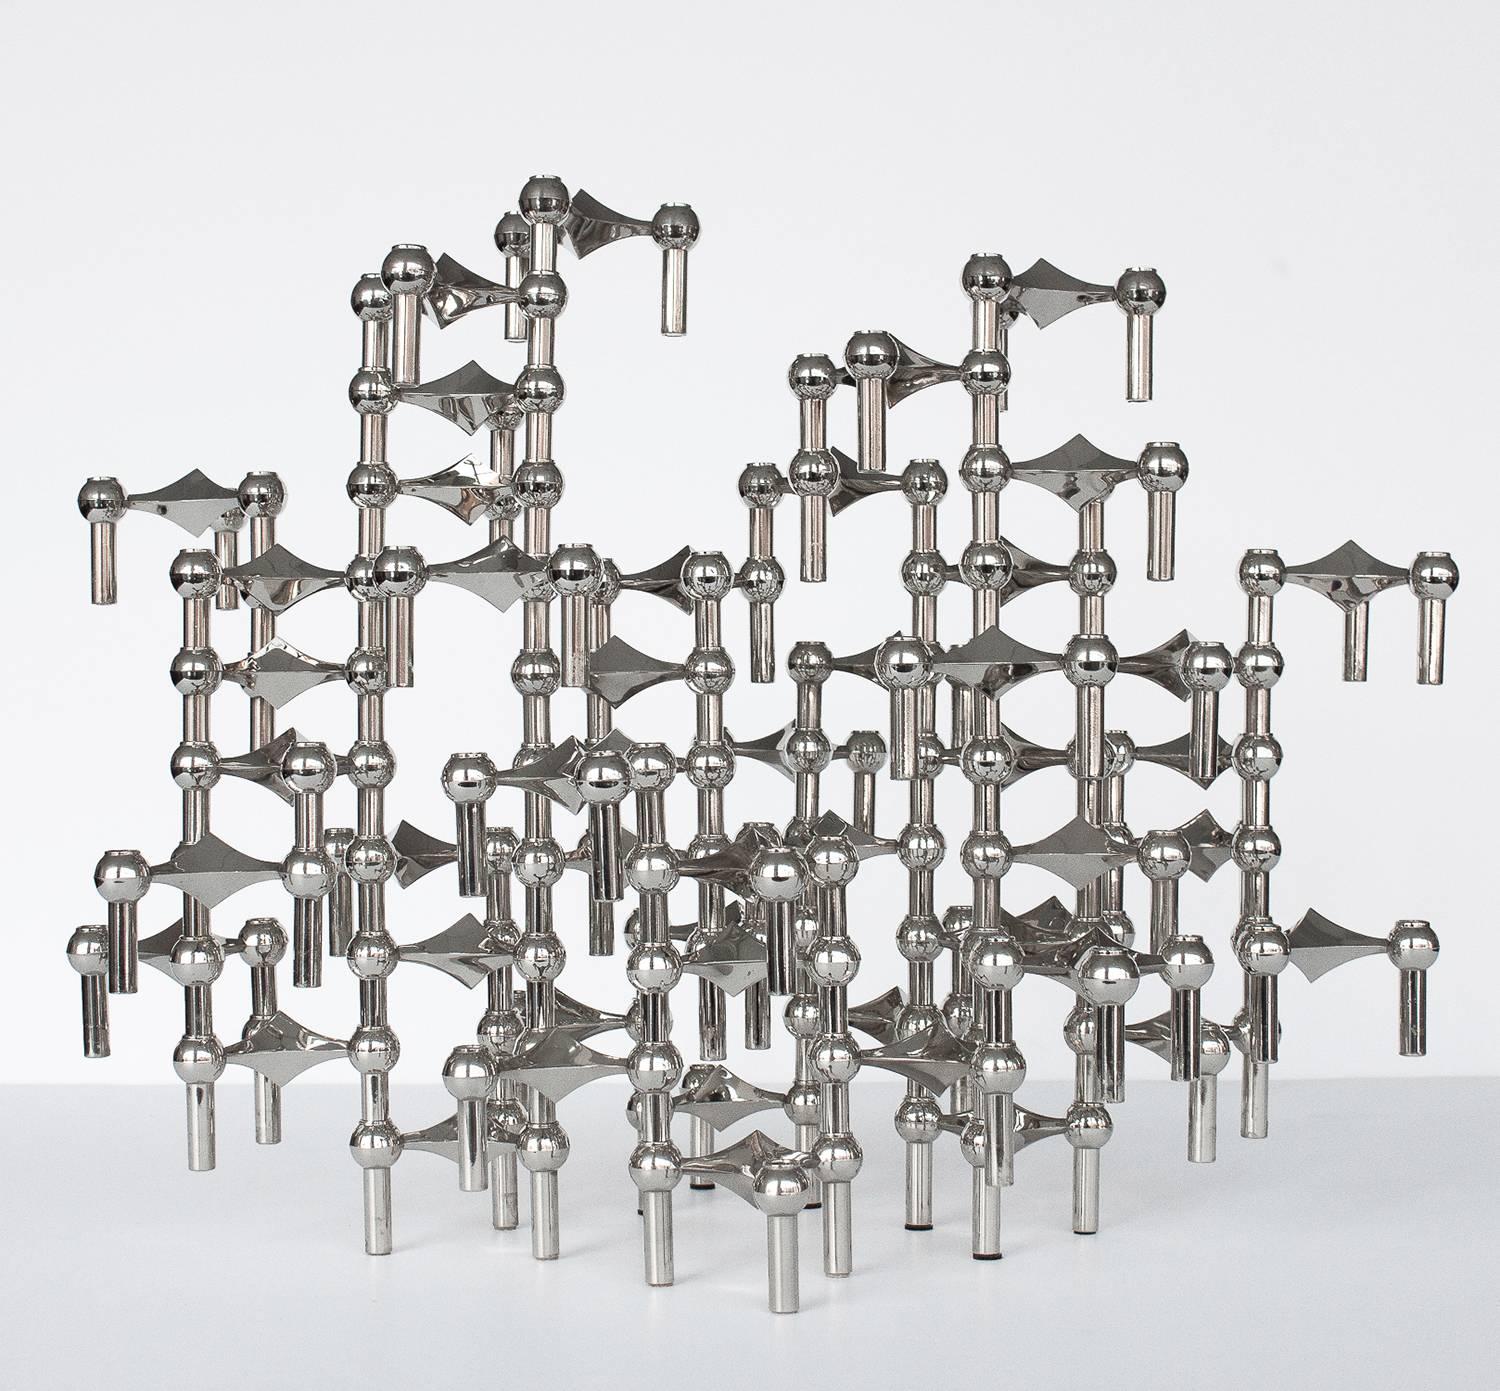 A sculpture made of 56 individual candleholders by Caesar Stoffi and Fritz Nagel for BMF, Germany. This modular design can be configured in an endless number of ways both vertically and horizontally by stacking each interlocking piece. Perfect as a